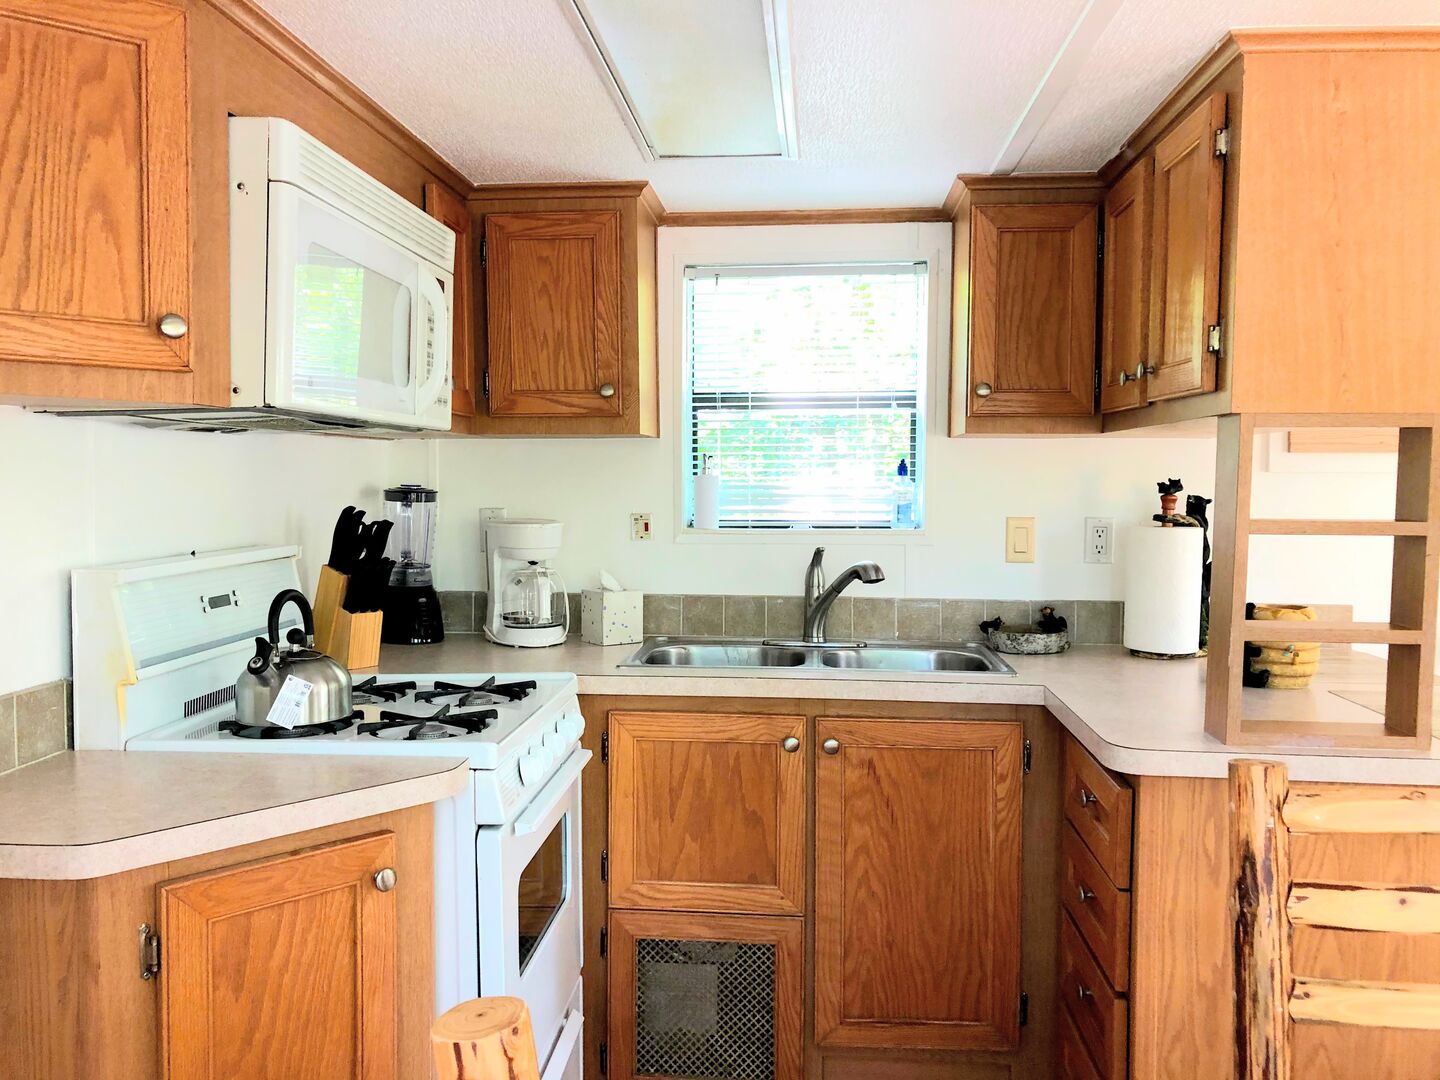 Cabin #2 -Fully equipped kitchen, with gas stove and oven as well.